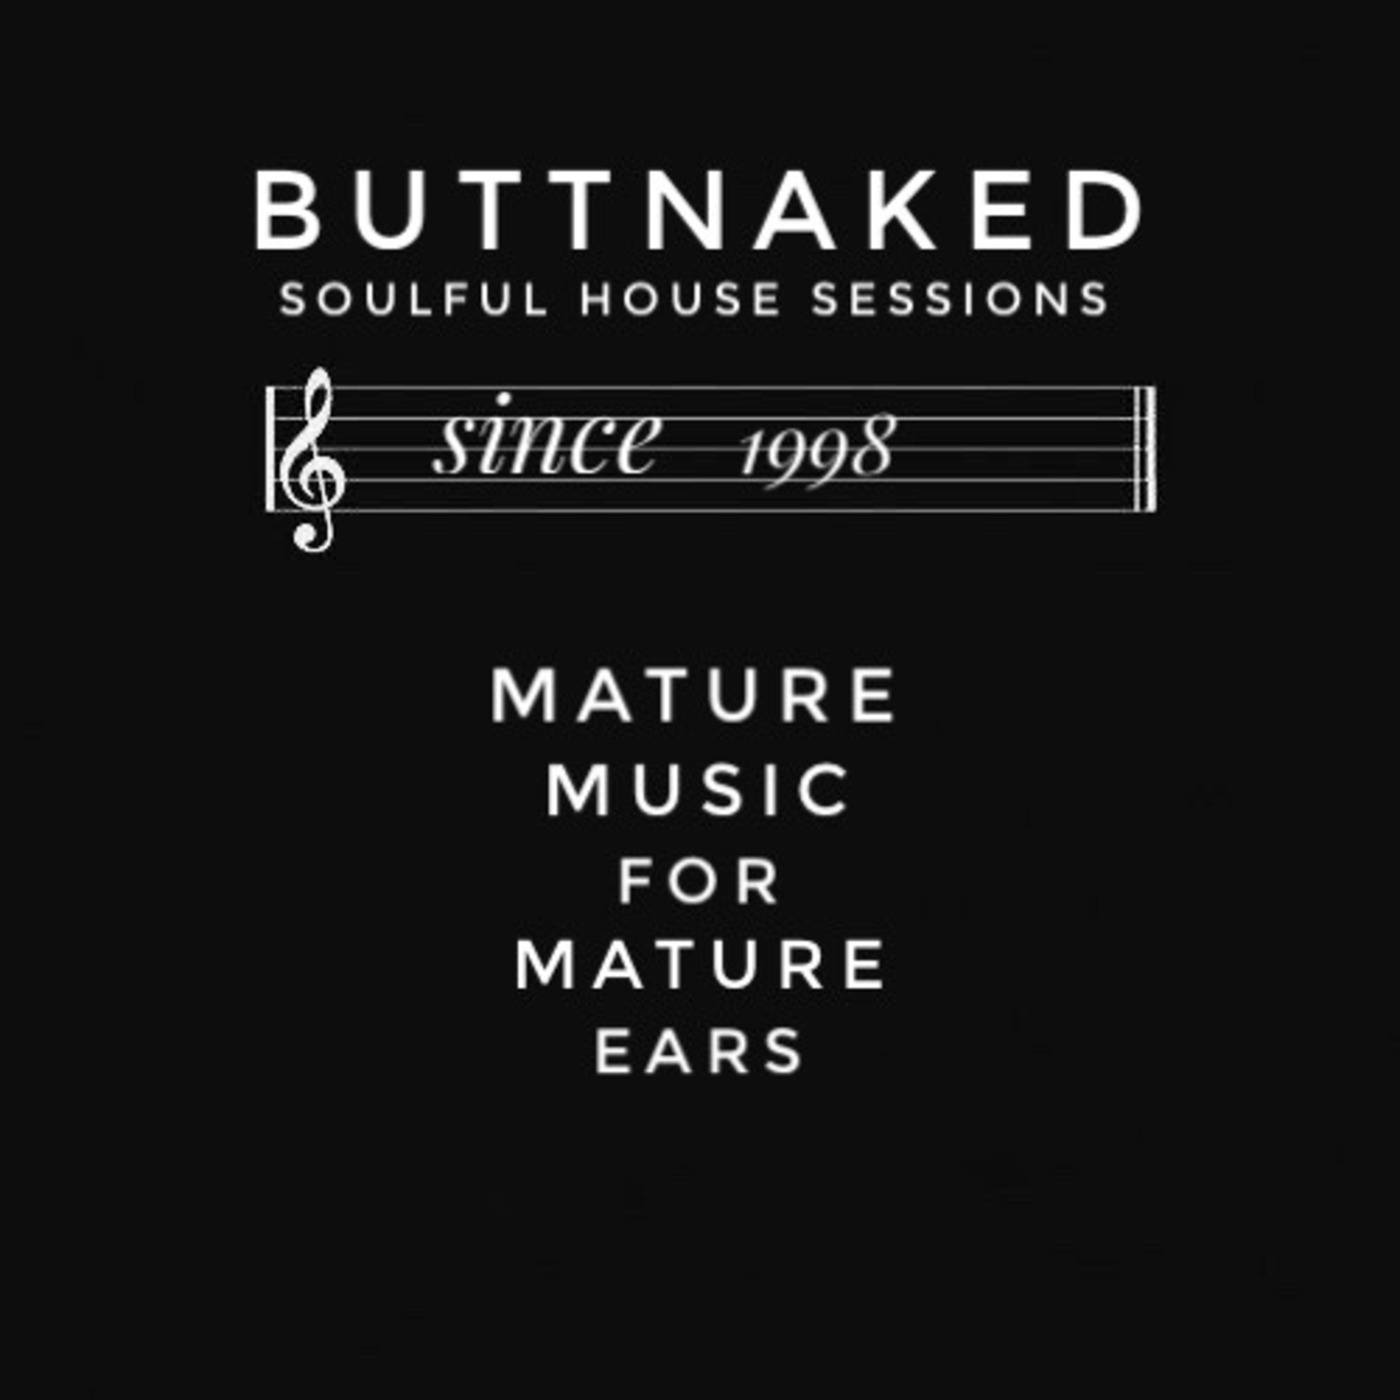 Iain Willis pres The Buttnaked Soulful House Sessions